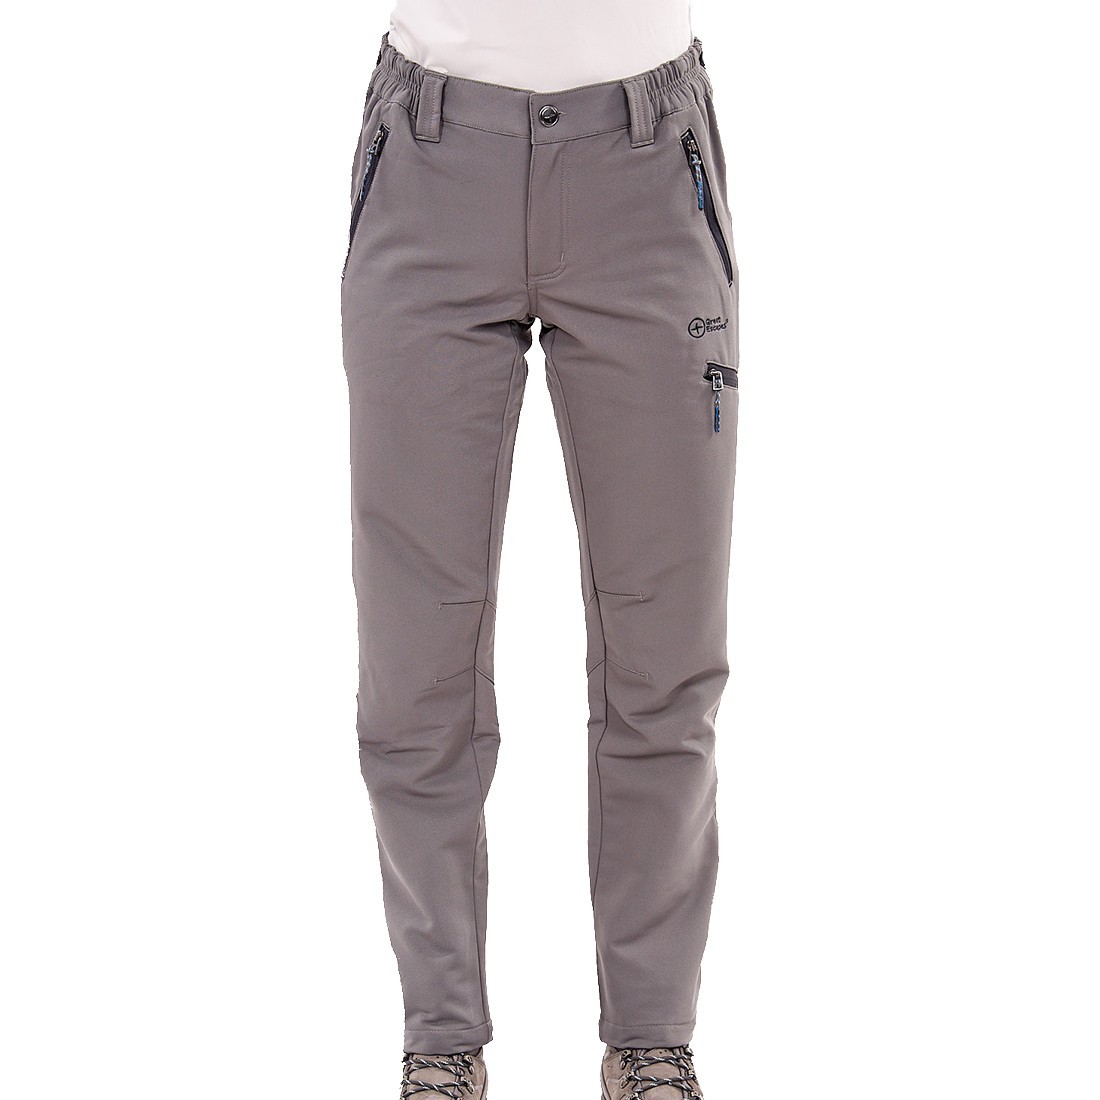 FUJI - Lady winter trousers water-repellent